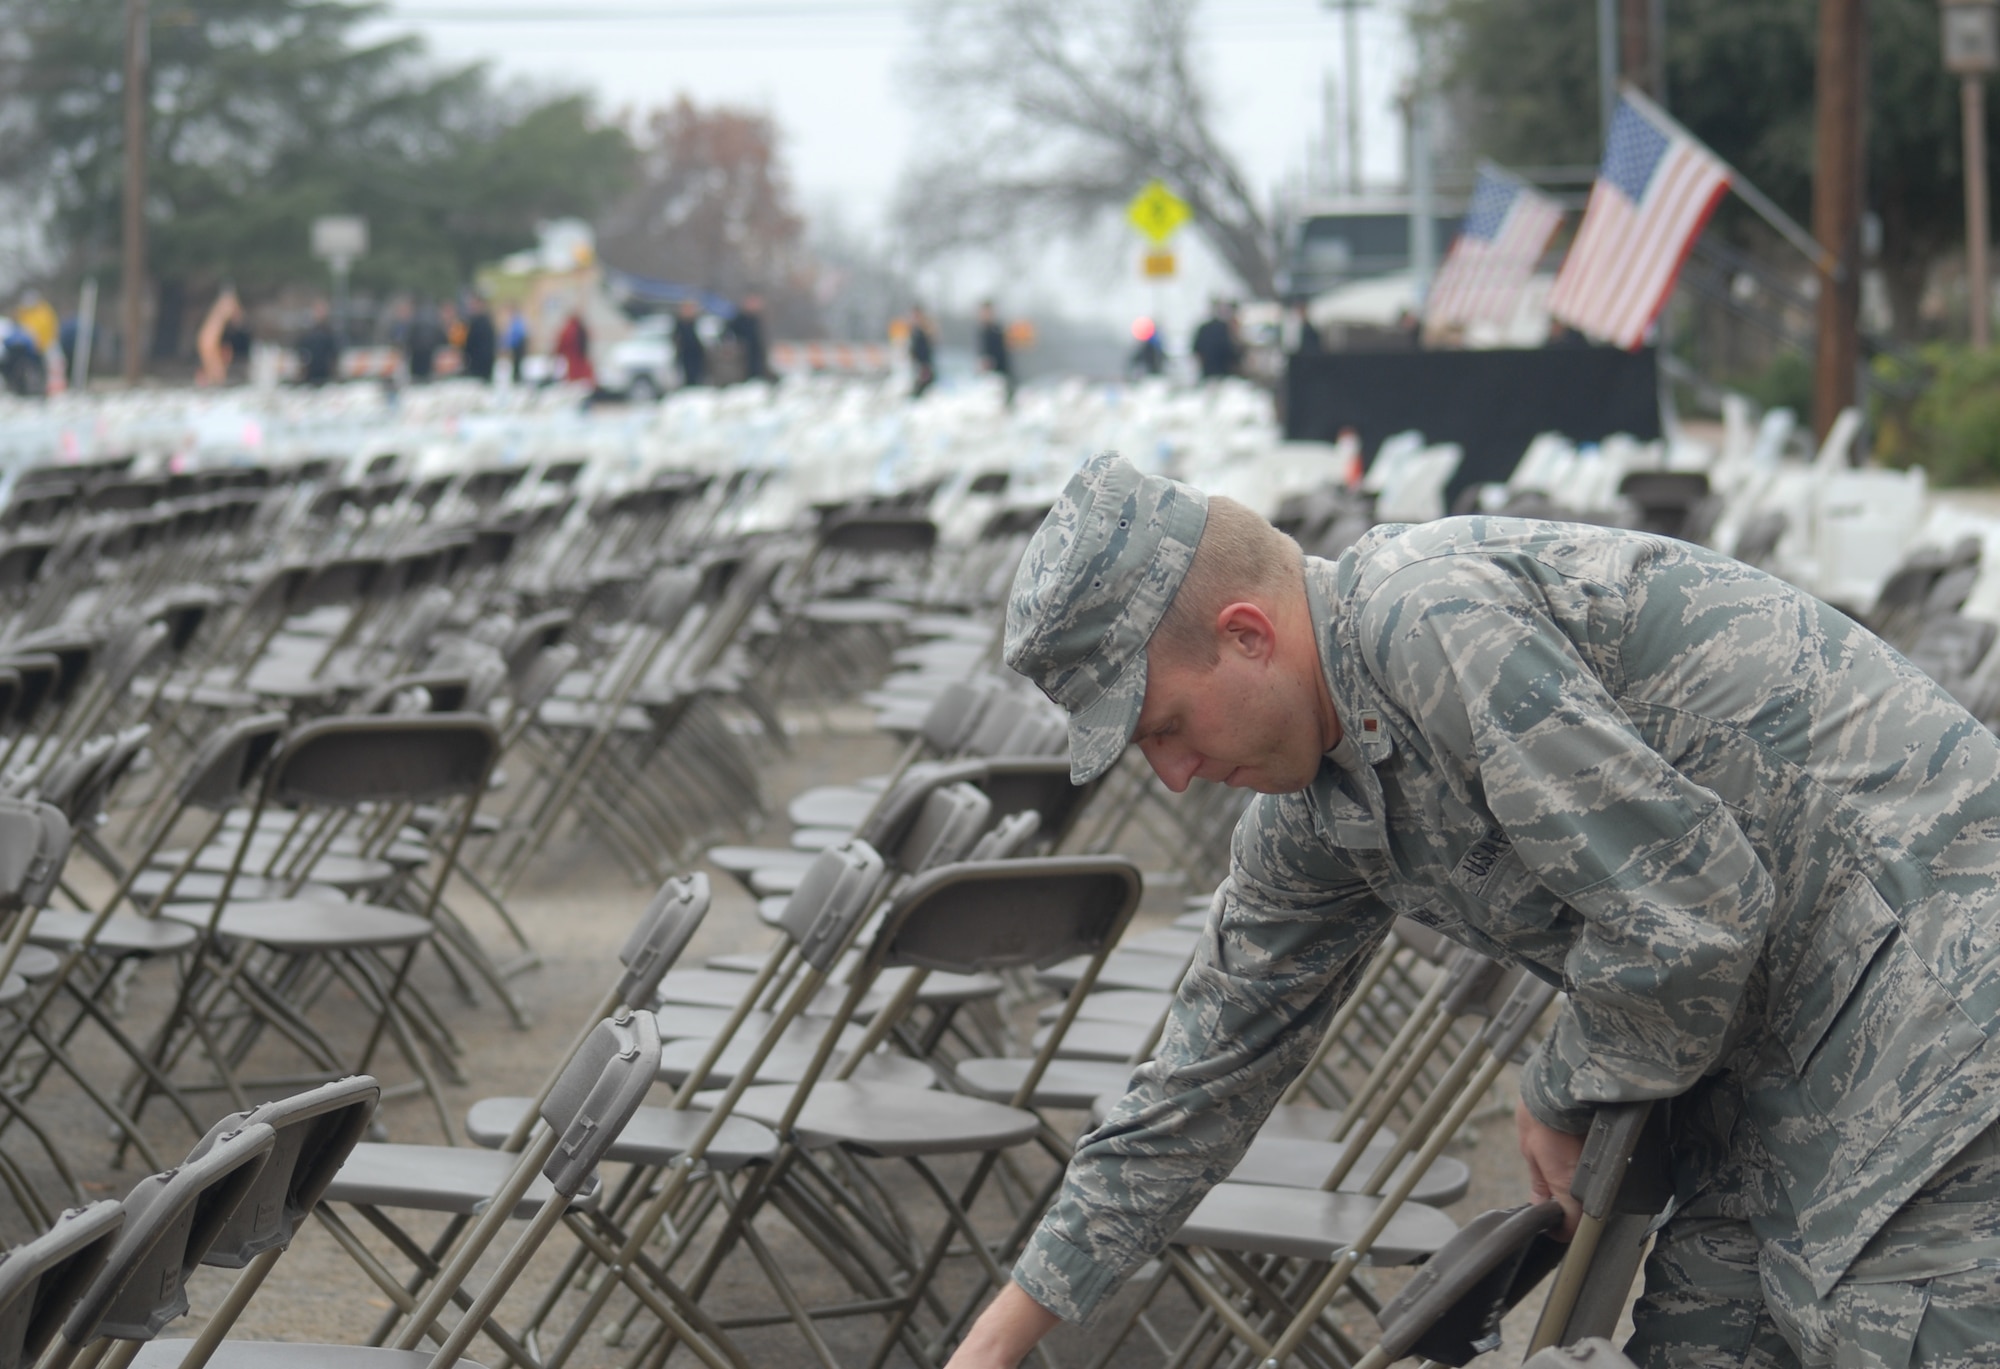 2nd Lt. Chad Brandl, 315th Training Squadron, Goodfellow AFB, Texas helps take down over 4,000 chairs for the grand opening ceremony of the George H.W. Bush Gallery of the War in the Pacific Museum, Fredericksburg on Dec. 7.  80 volunteers of Soldiers, Sailors, Airman and Marines from Goodfellow travelled 150 miles to help with the opening of the museum expansion, providing chair set-up and tear down, distinguished guests escort and led tours of the new facility.  The former President George H.W. Bush, attended as well as Rick Perry, Governor of Texas.  Over 4,000 people were in attendance.  (U.S. Air Force photo by/Robert D. Martinez)